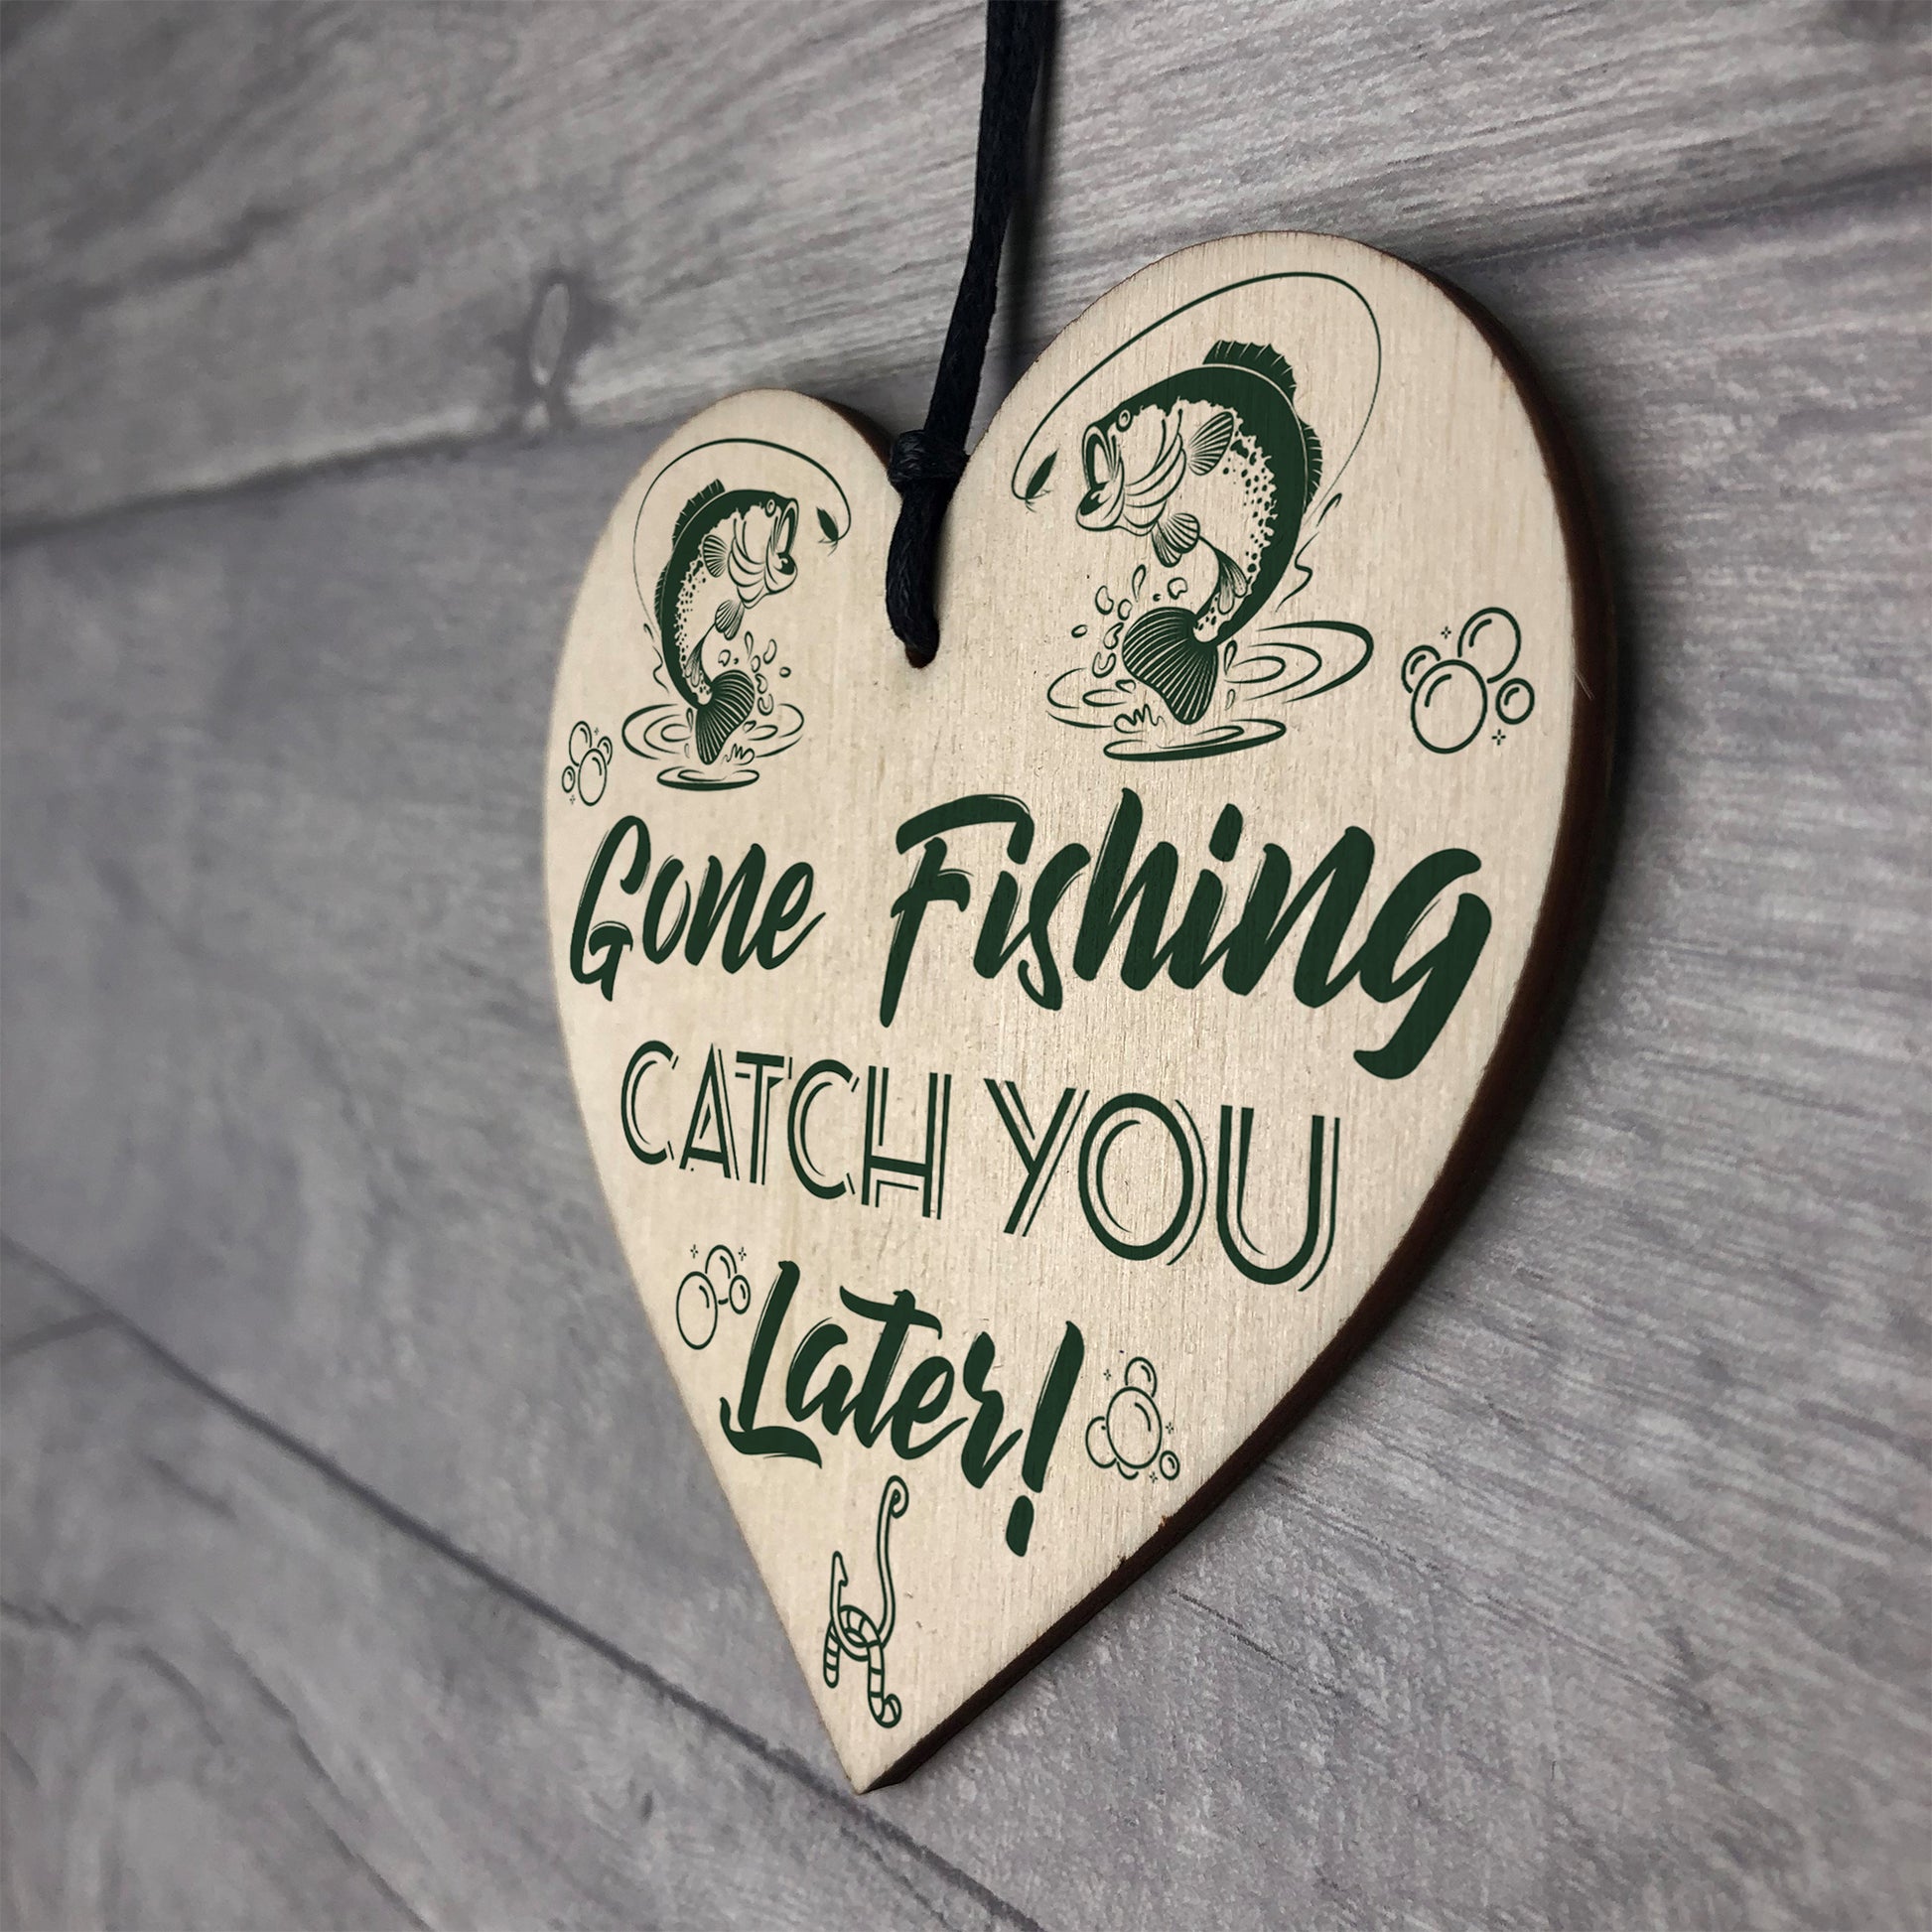 Red Ocean GONE FISHING Catch You Later Funny Fishing Sign